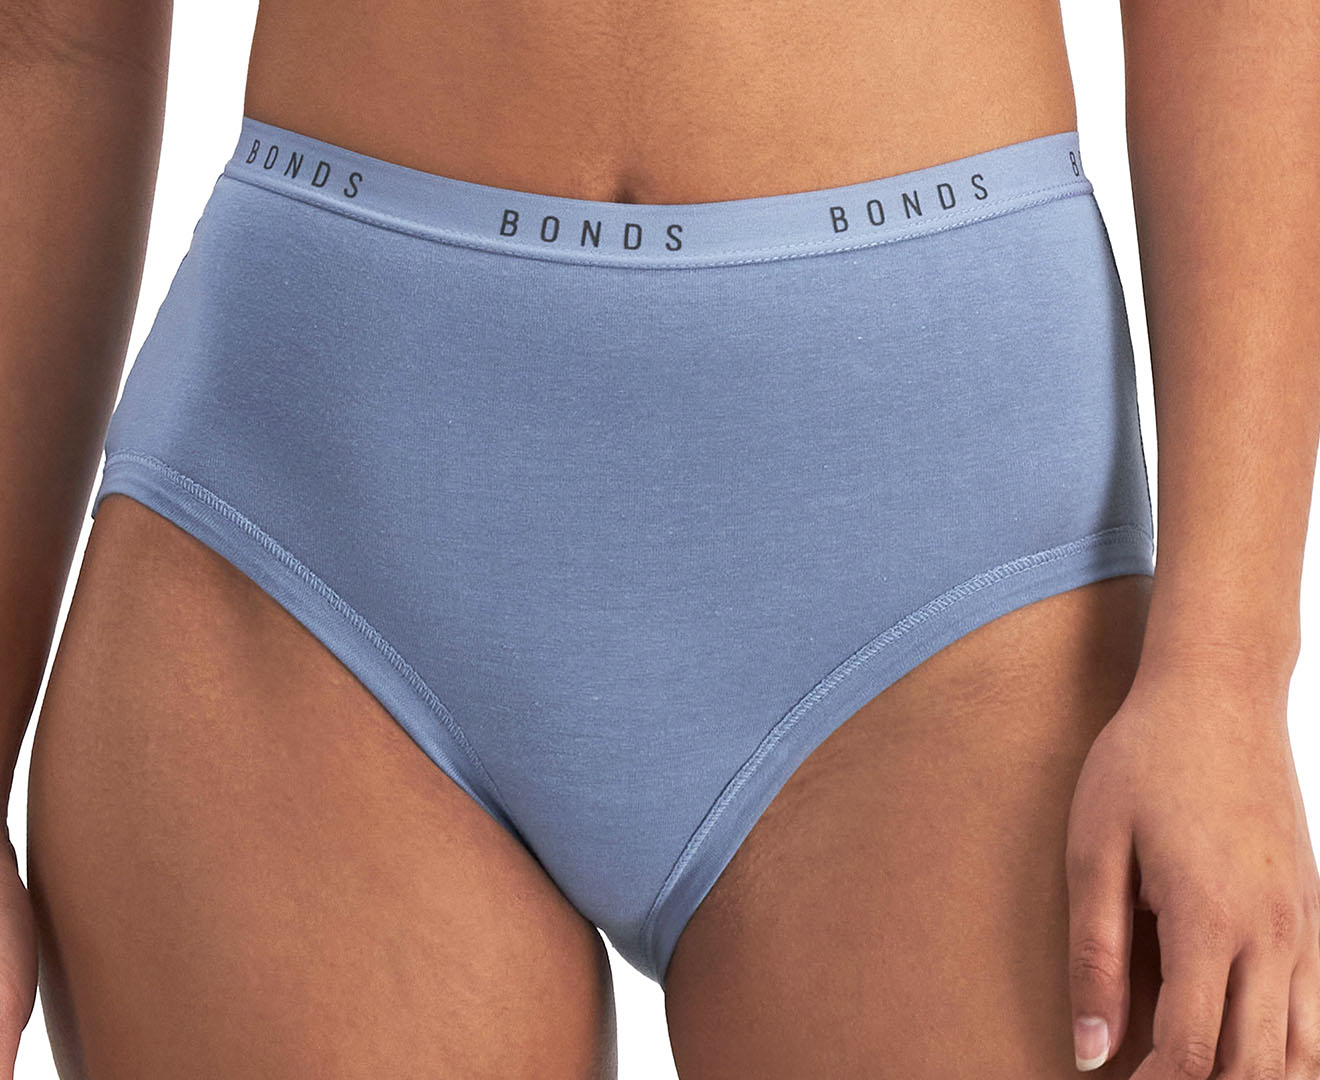 Bonds Women's Everyday Cottontails Full Briefs 3 Pack - Multi